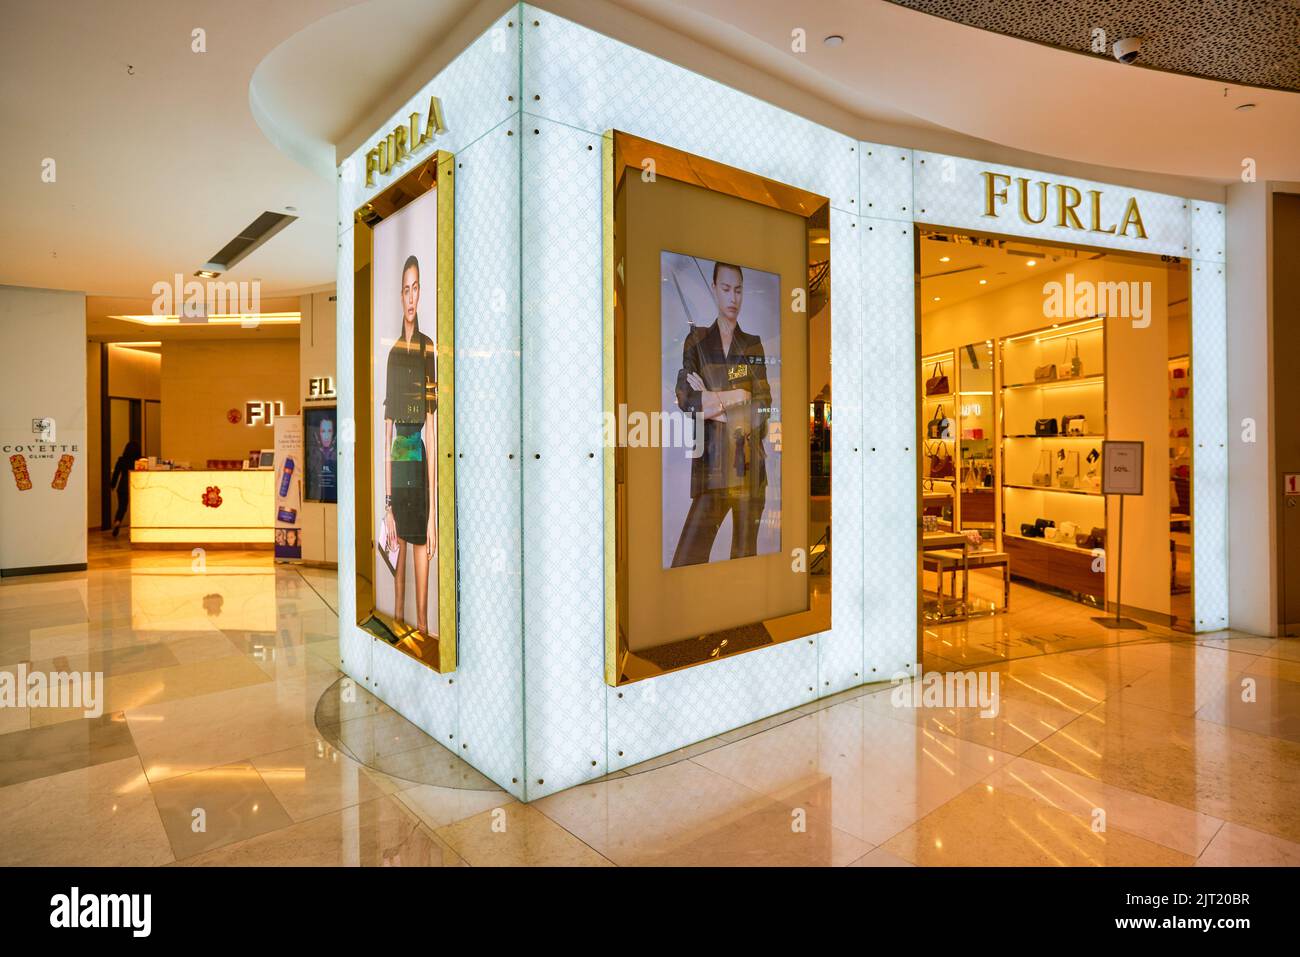 SINGAPORE - CIRCA JANUARY, 2020: Furla storefront in ION Orchard shopping mall in Singapore. Stock Photo